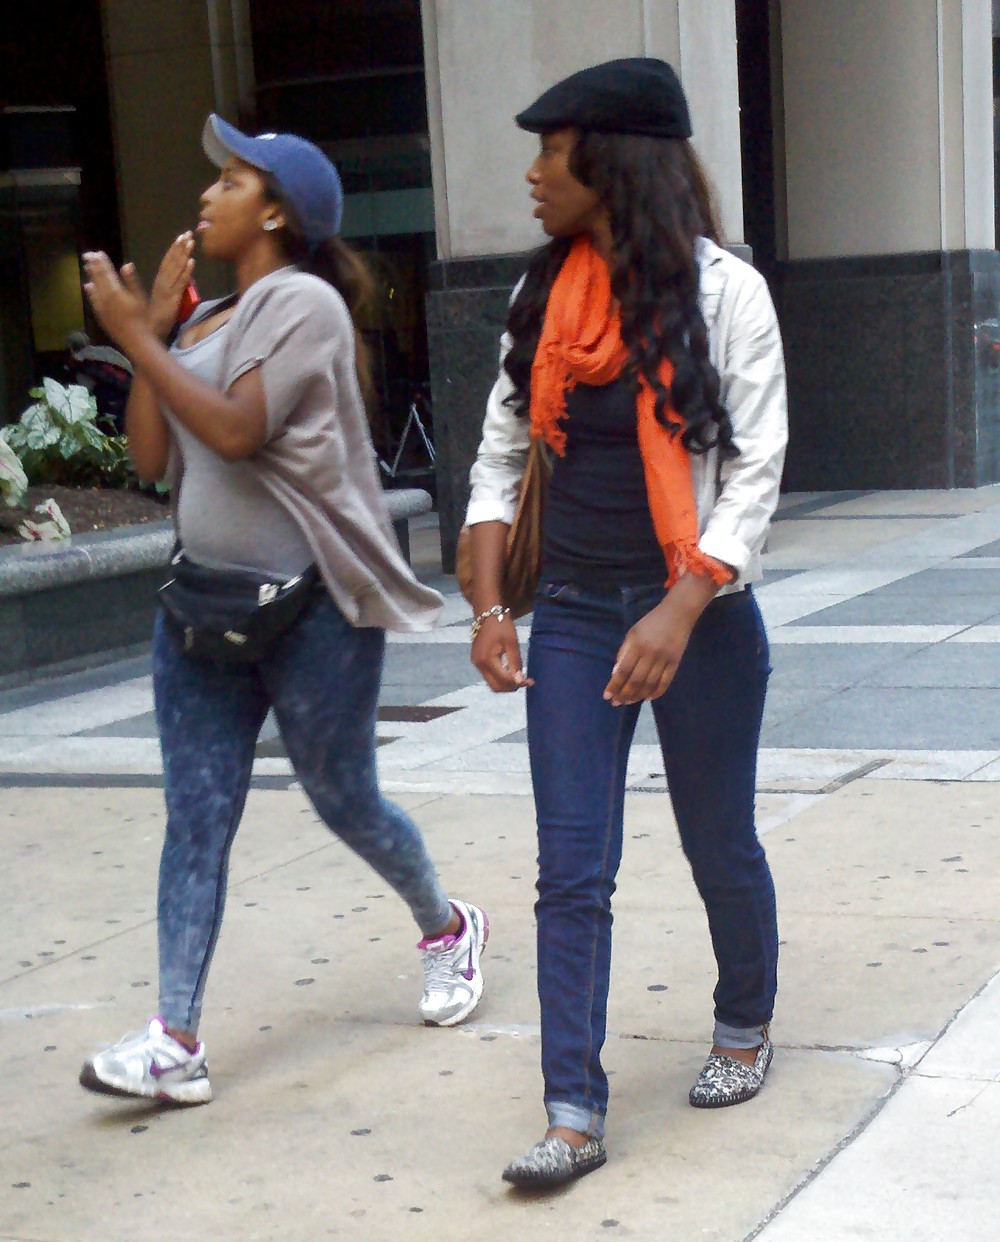 Philly Girls in the Street 2 #7882596